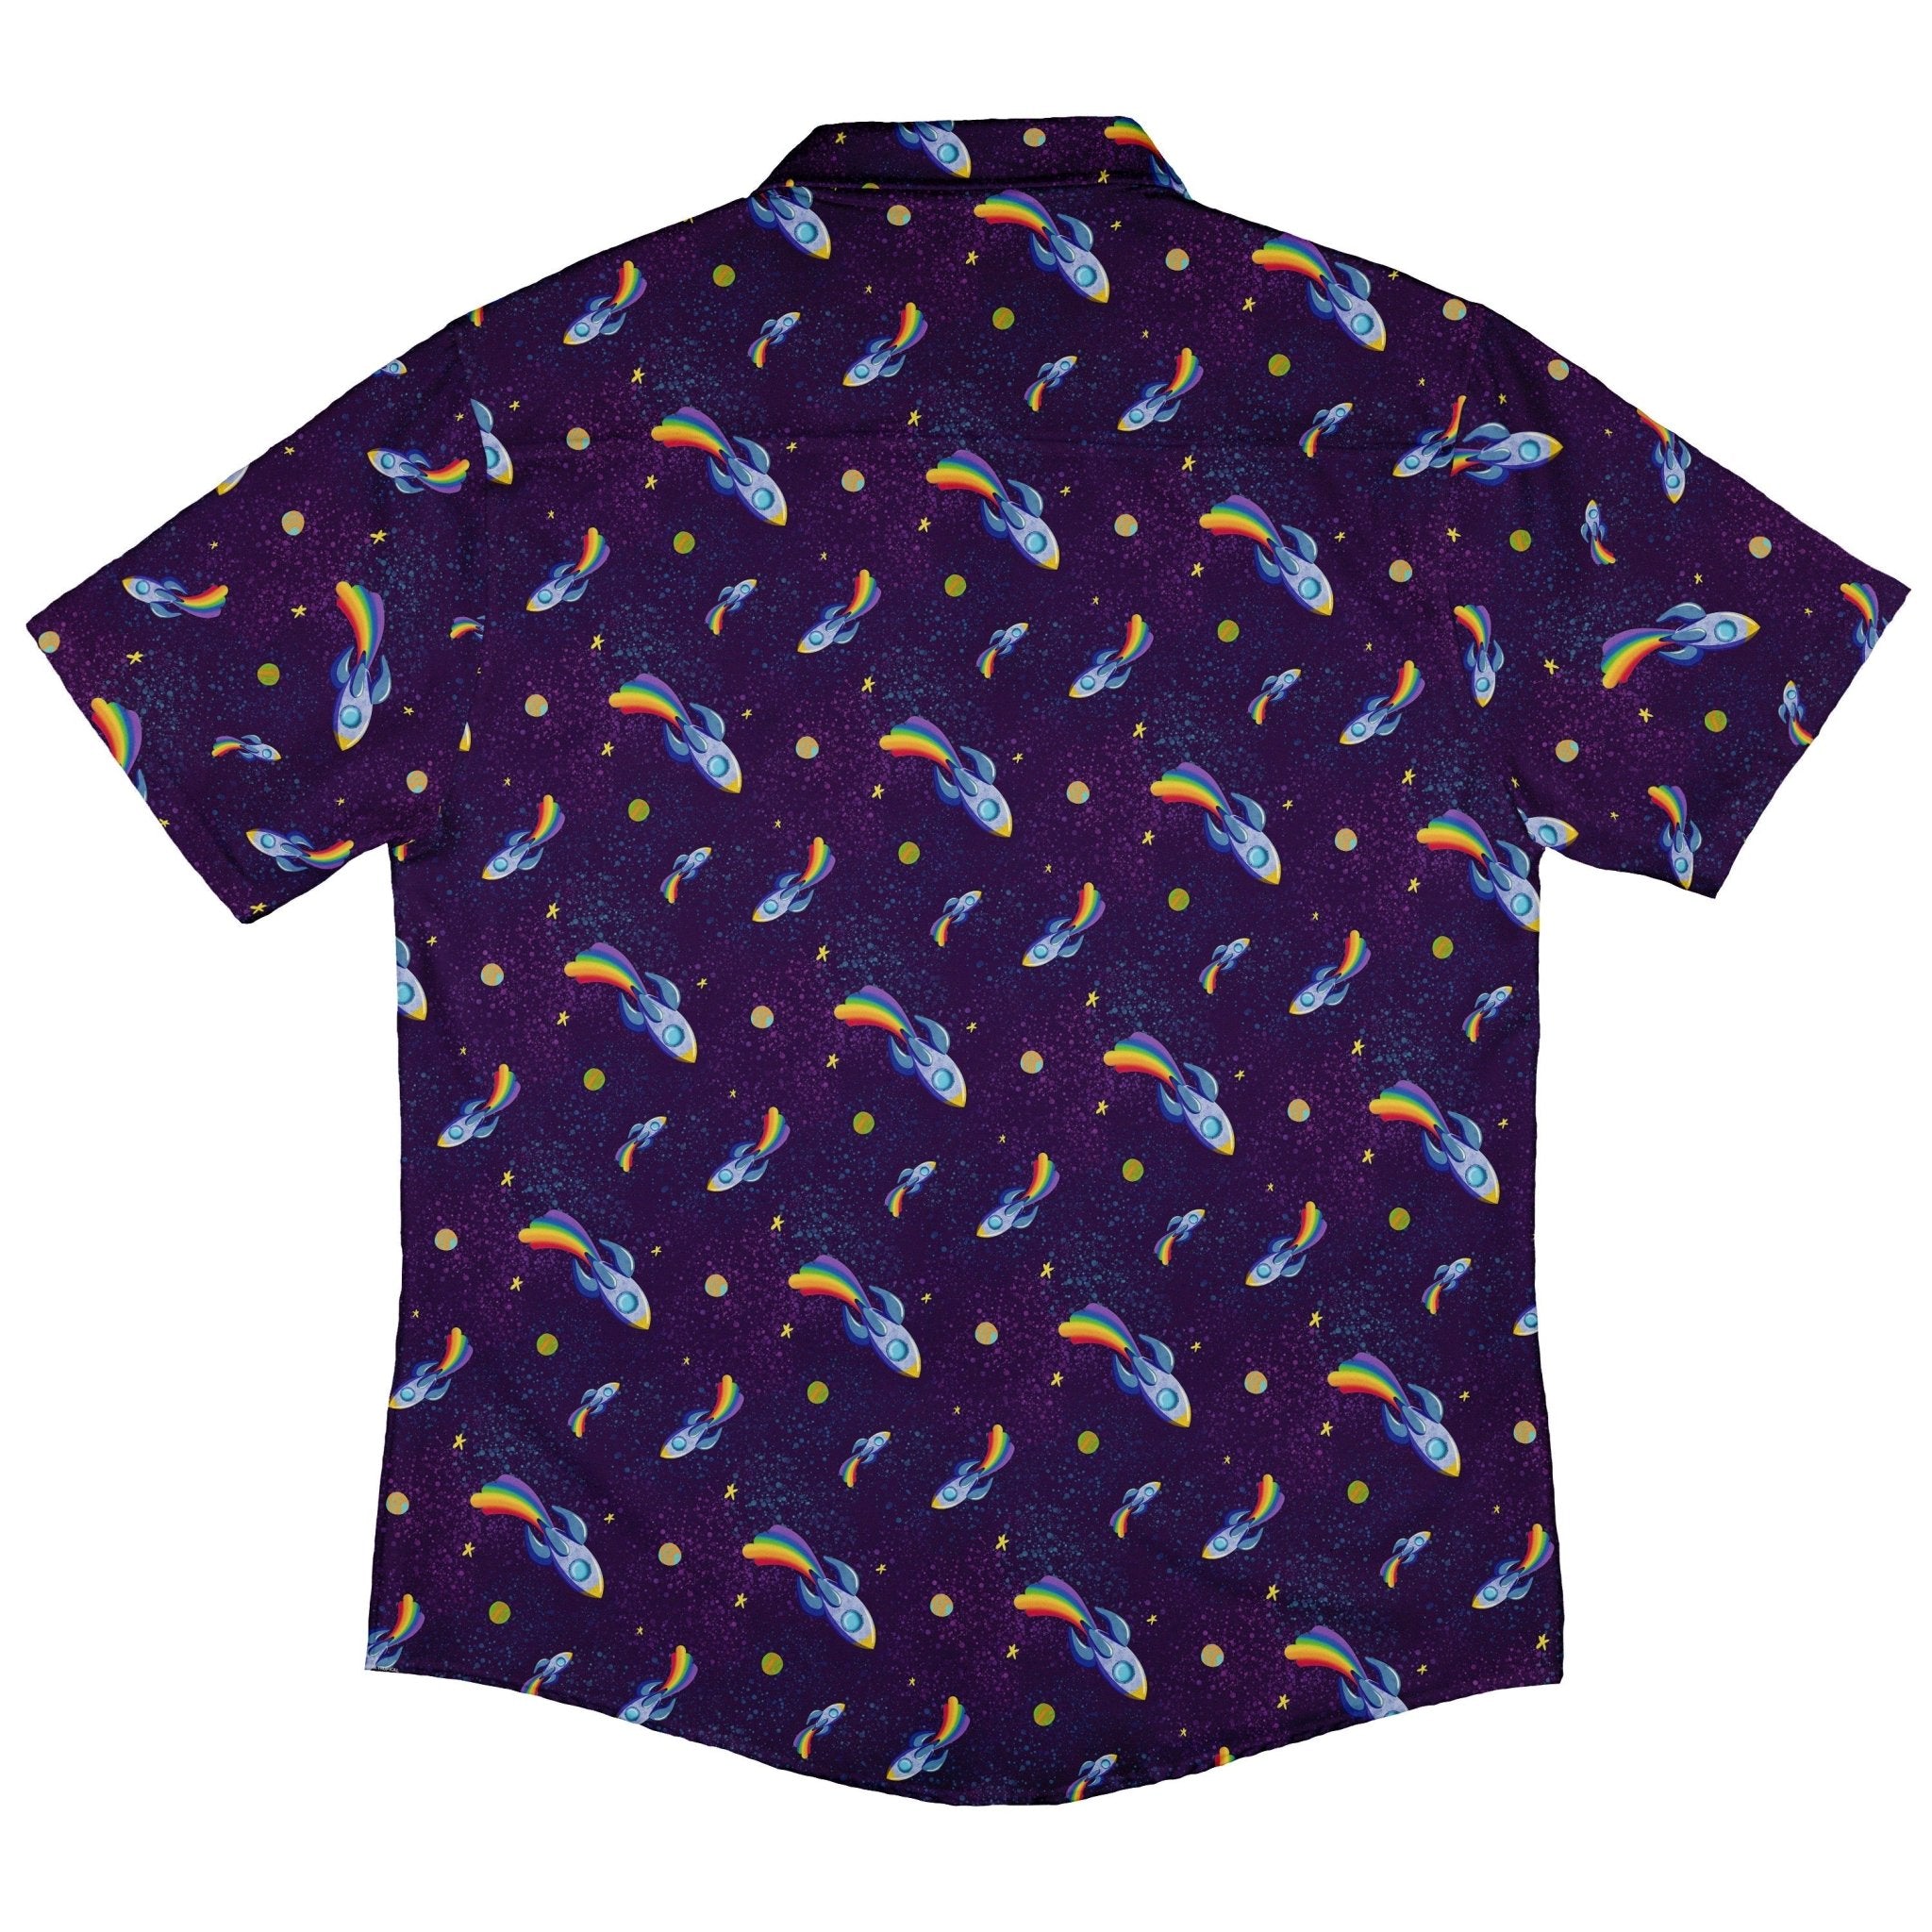 Rocket Ships Starry Night Button Up Shirt - adult sizing - Design by Carla Morrow - outer space & astronaut print